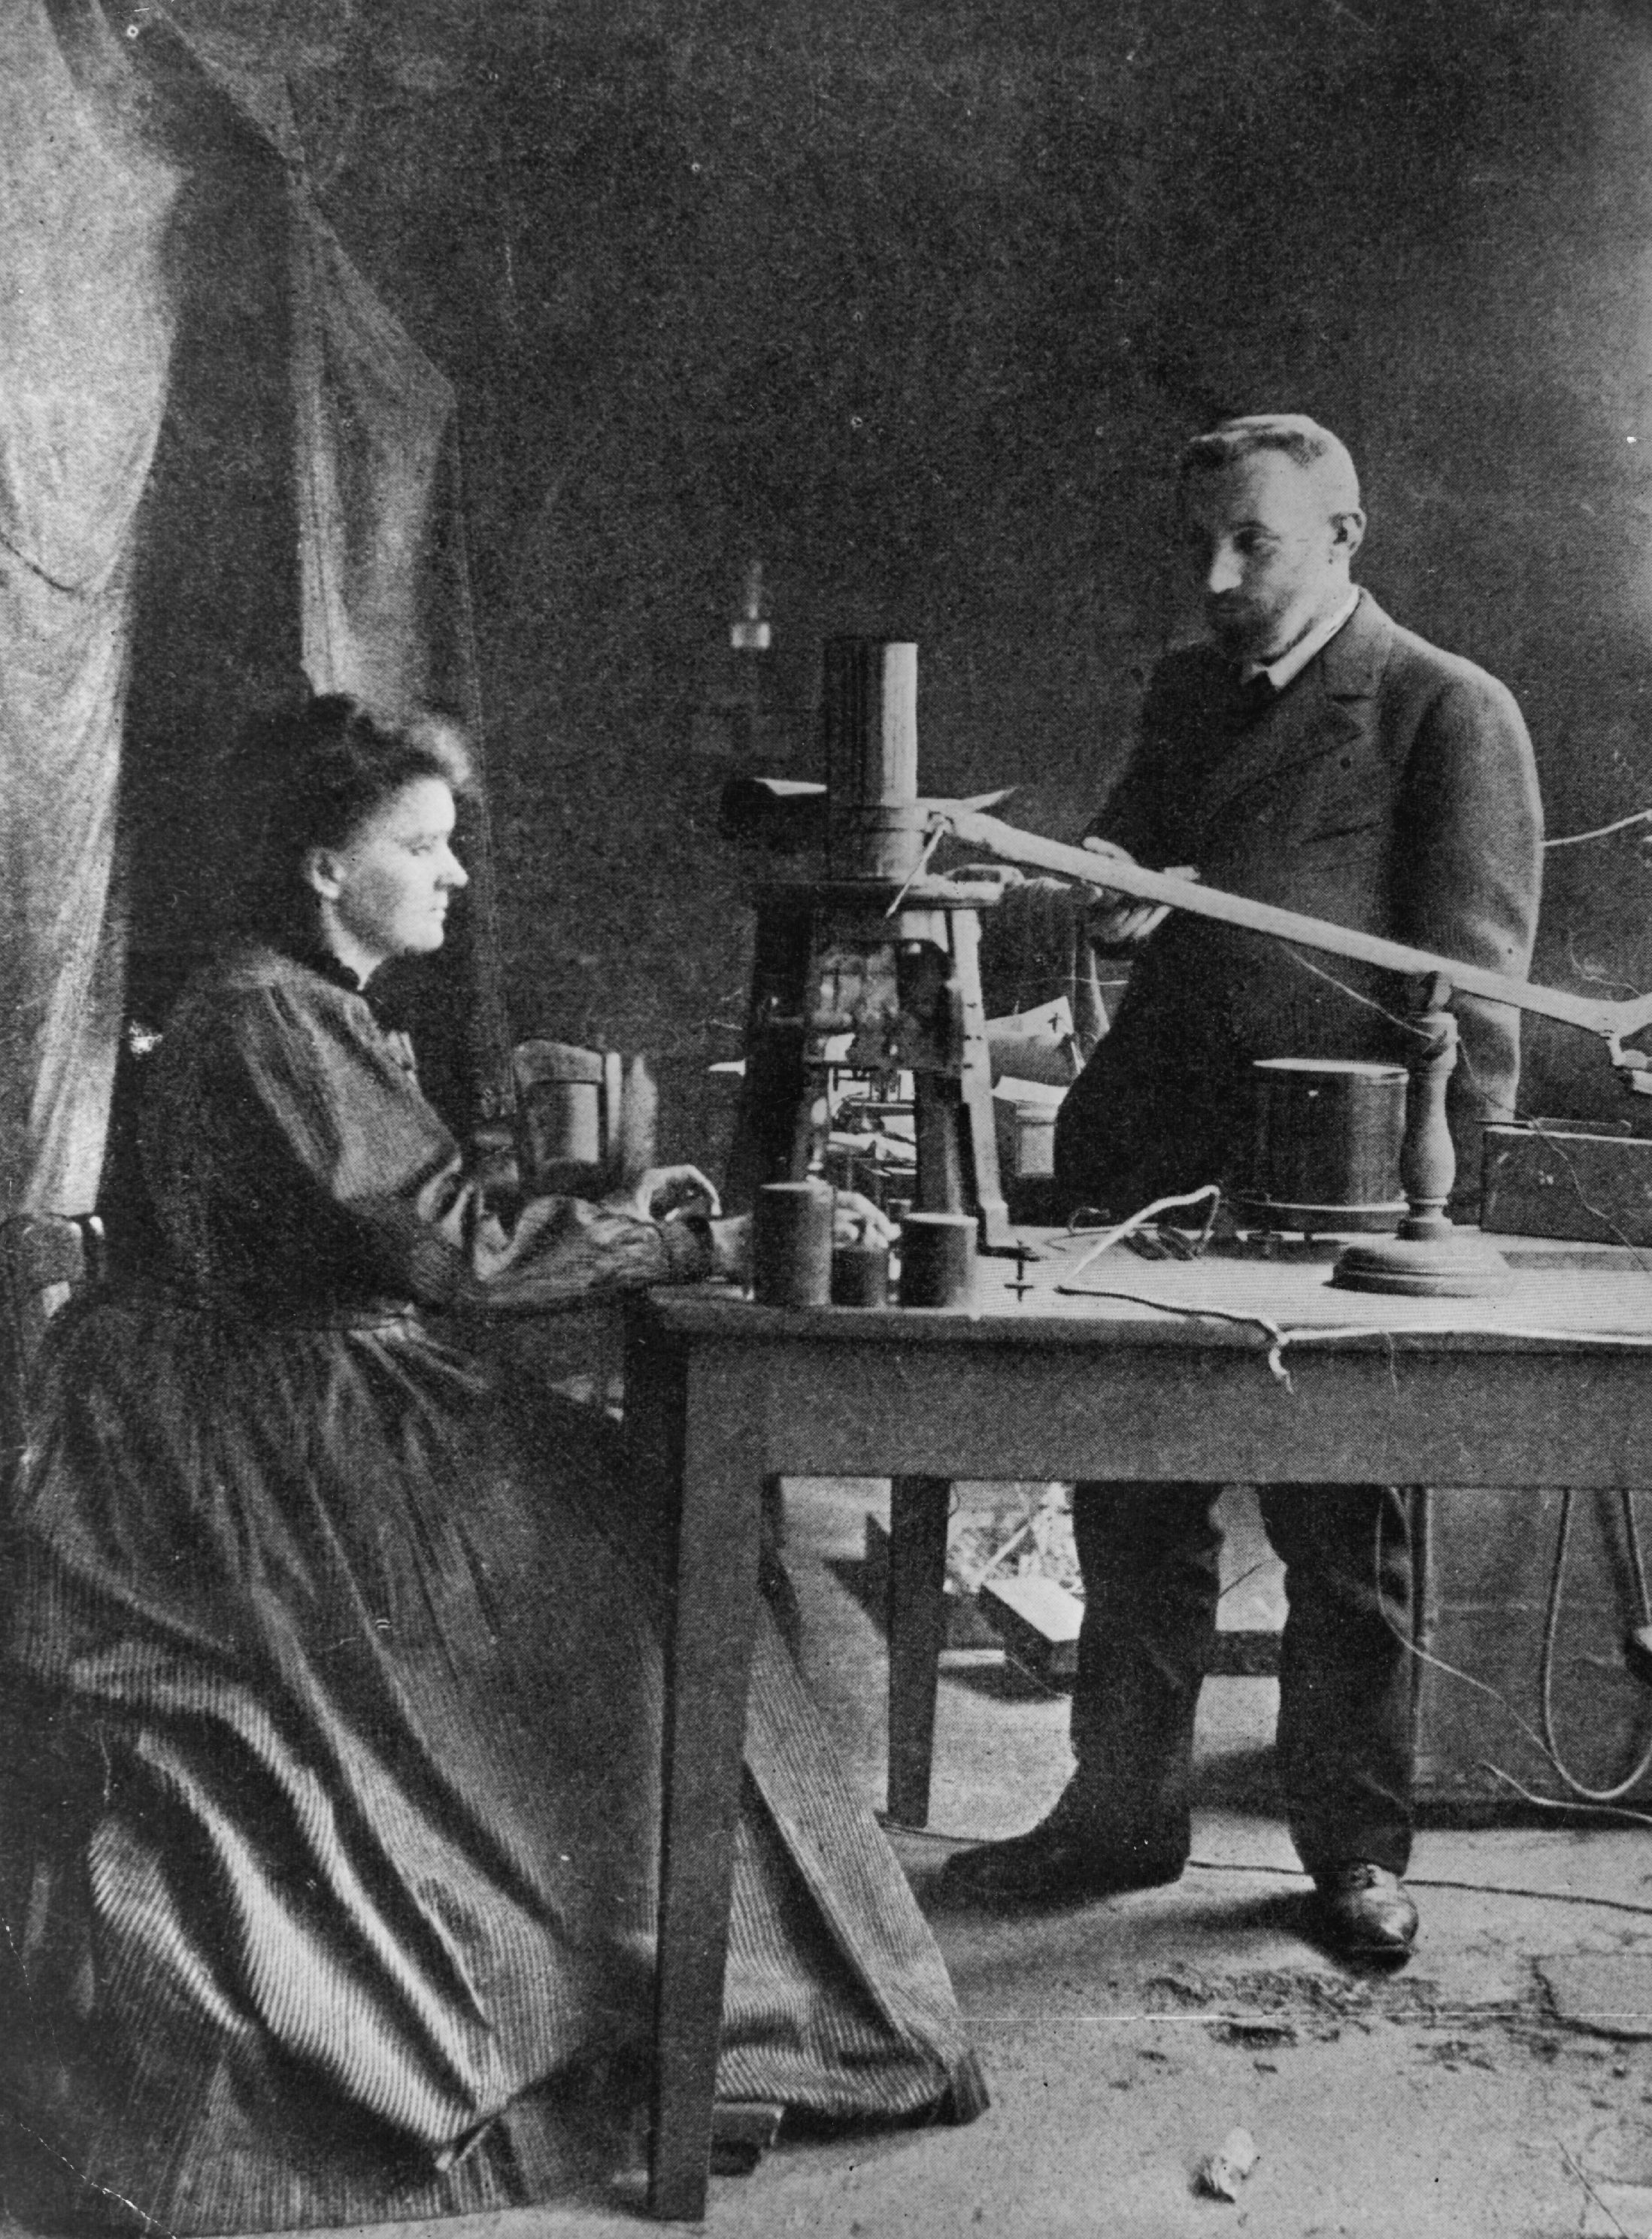 Celebrities who died young image marie curie and pierre